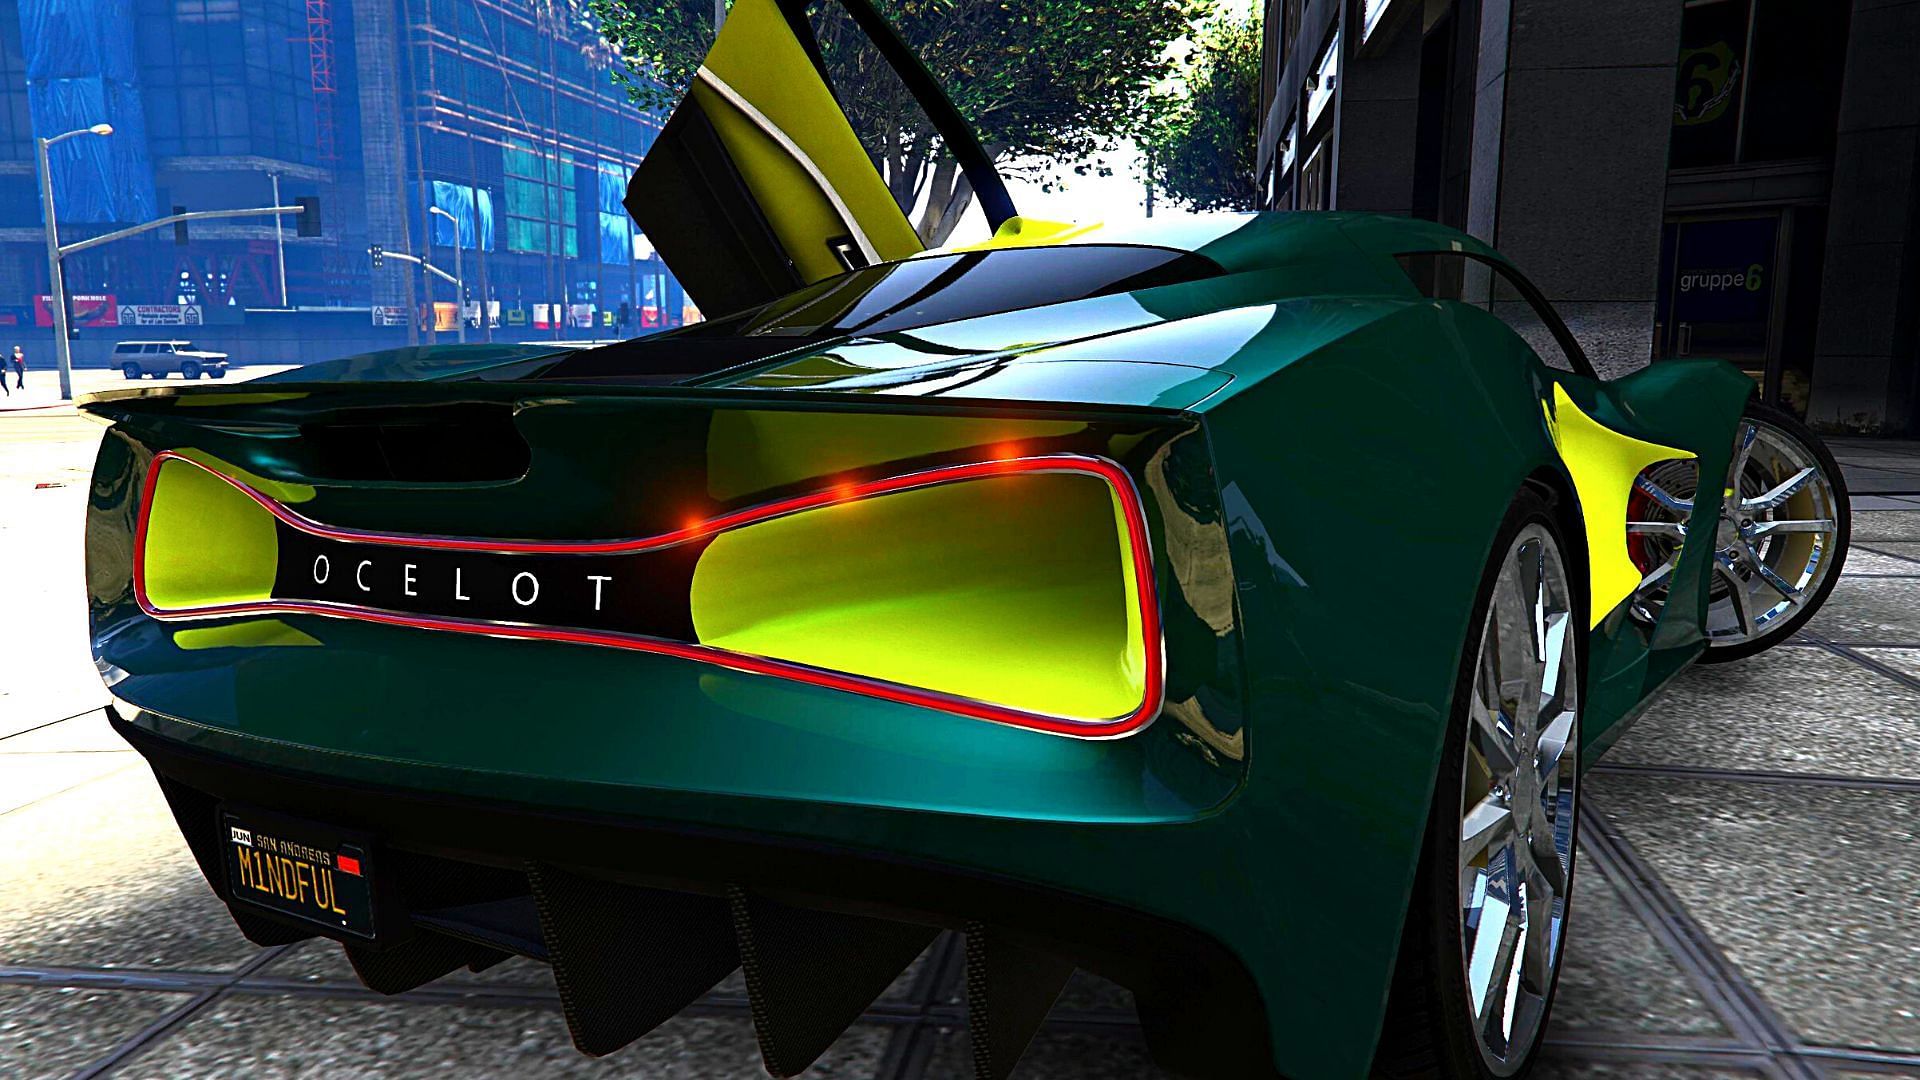 GTA Online Ocelot Virtue is finally out: Performance, price, and more